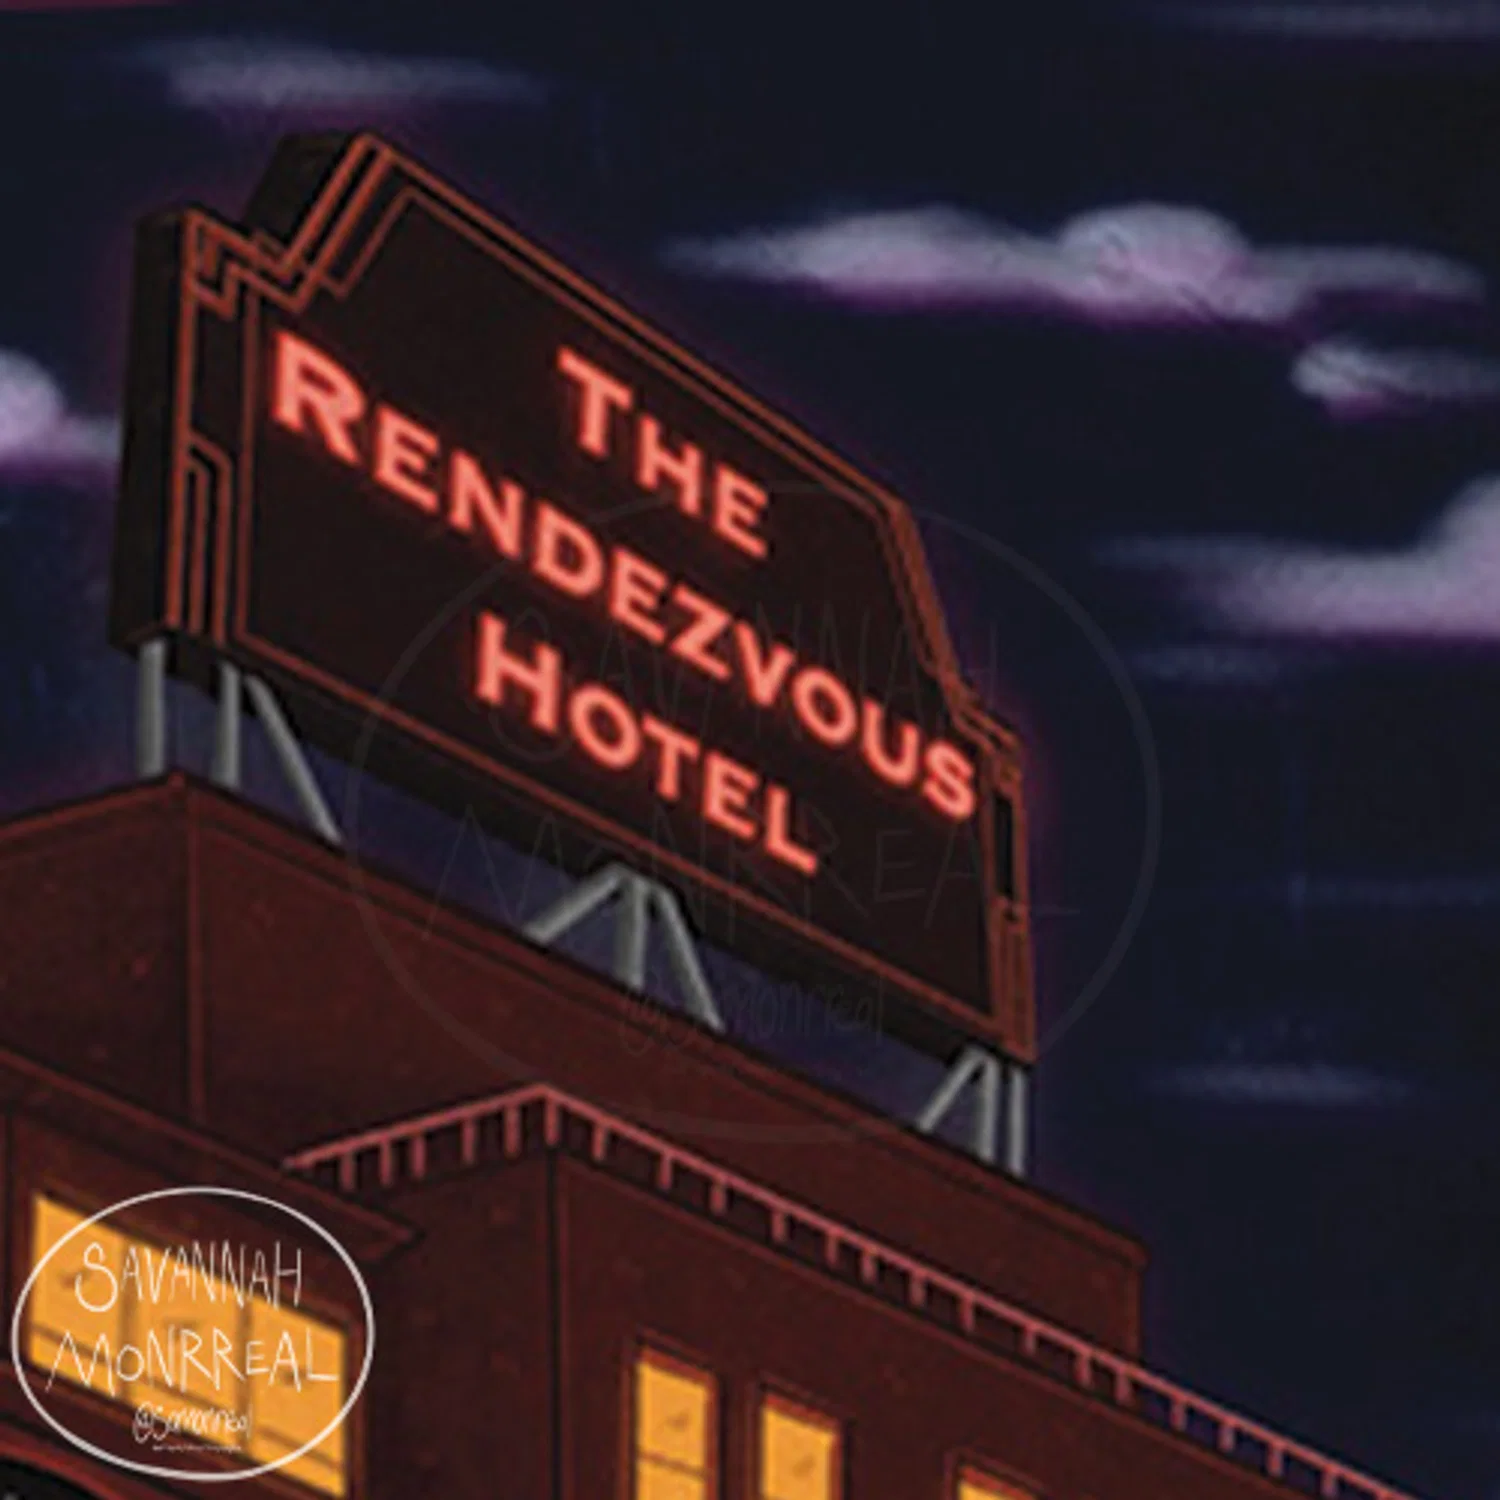 Exterior short of a hotel with a rooftop sign that reads, "The Rendezvous Hall" which is lit in red. There is a night sky with purple hued clouds cascading in the background. There is a watermark in the corner that says "Savannah Monrreal @samonrreal"